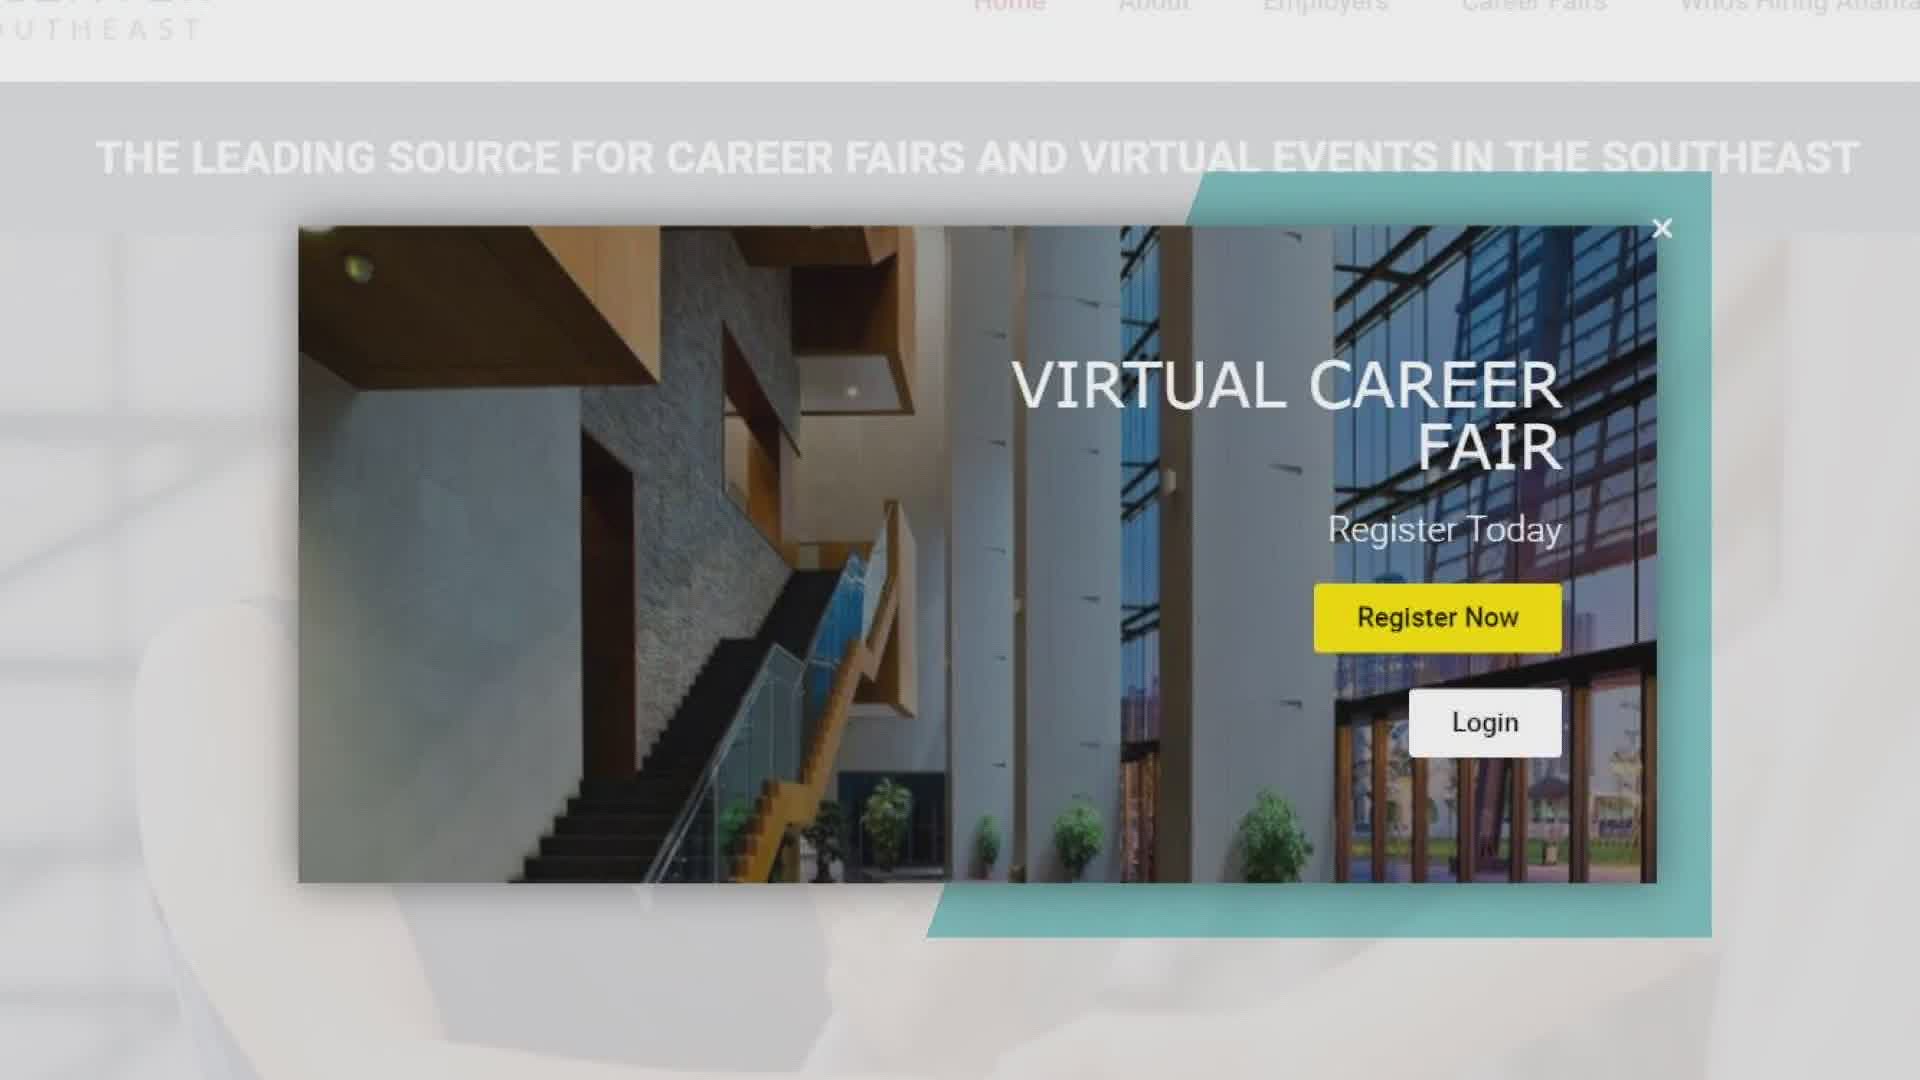 The Southeast Career Center helps workers find jobs during the COVID-19 pandemic. The virtual fair gives workers better access to employers than before.